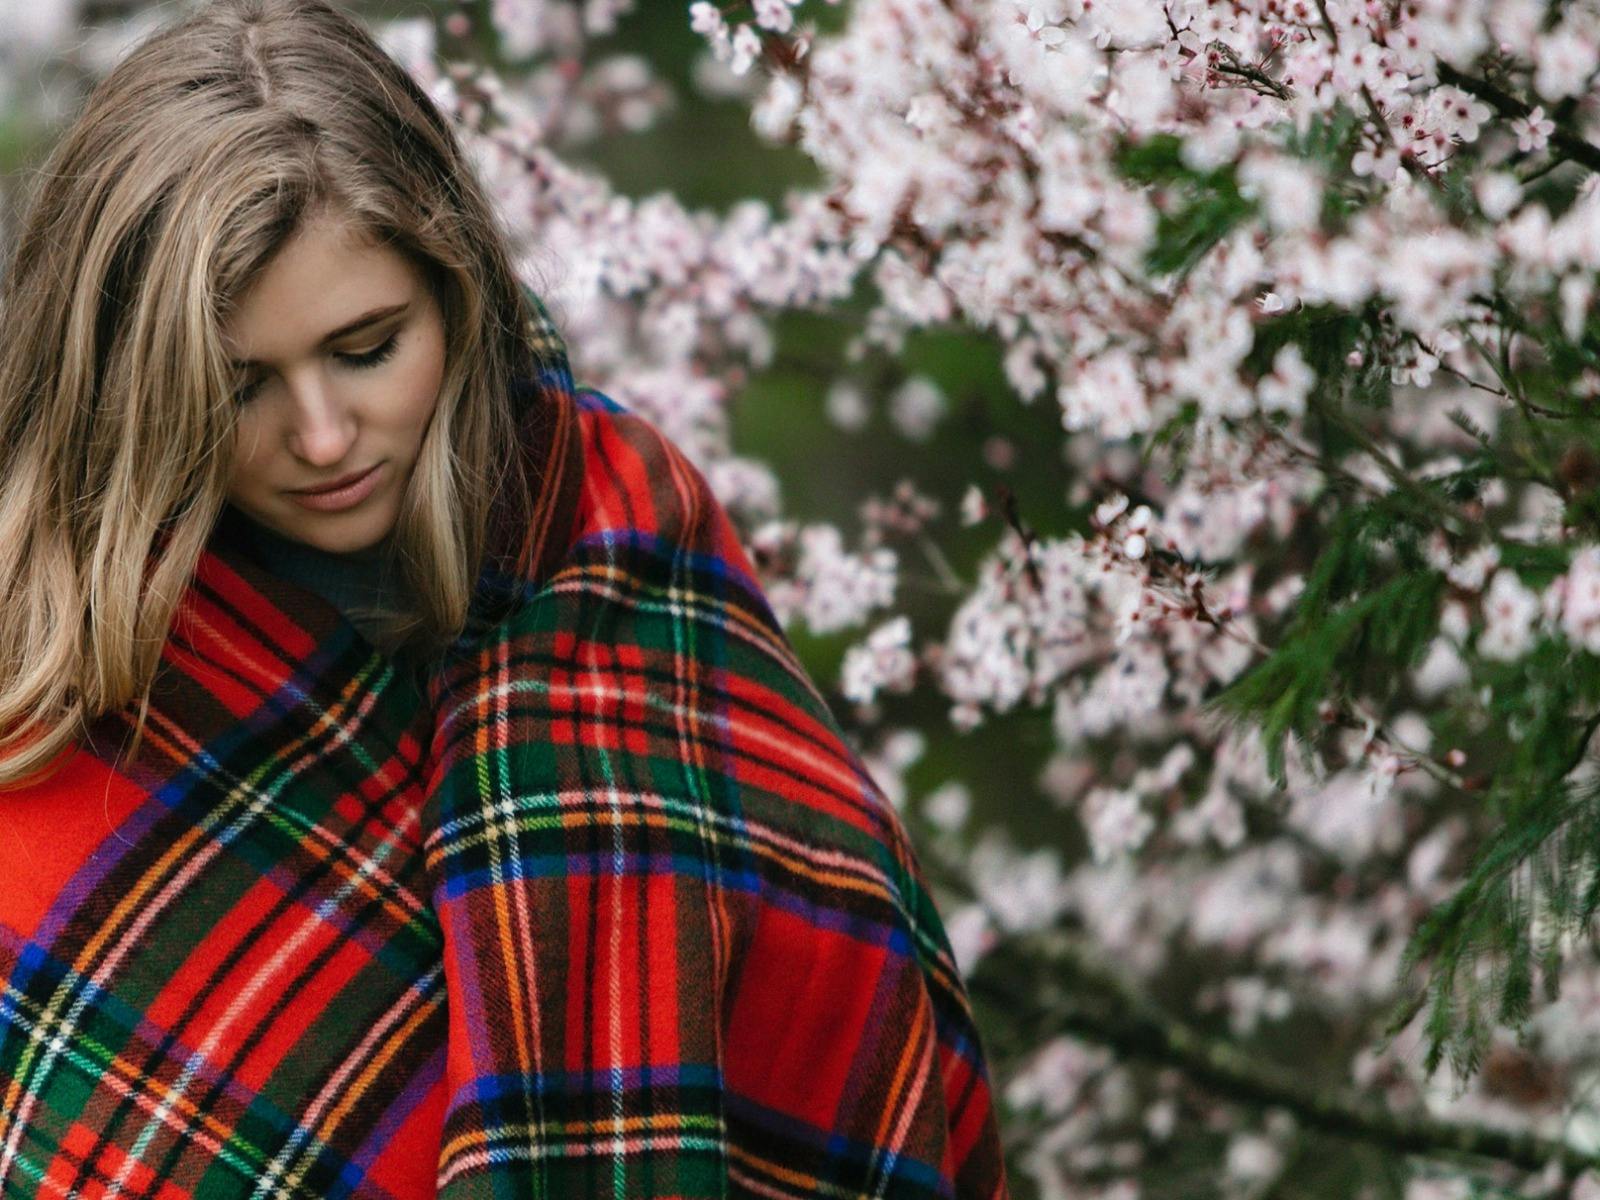 Young lady with long brown hair wrapped in red, green, blue checked blanket in front of pink blossom